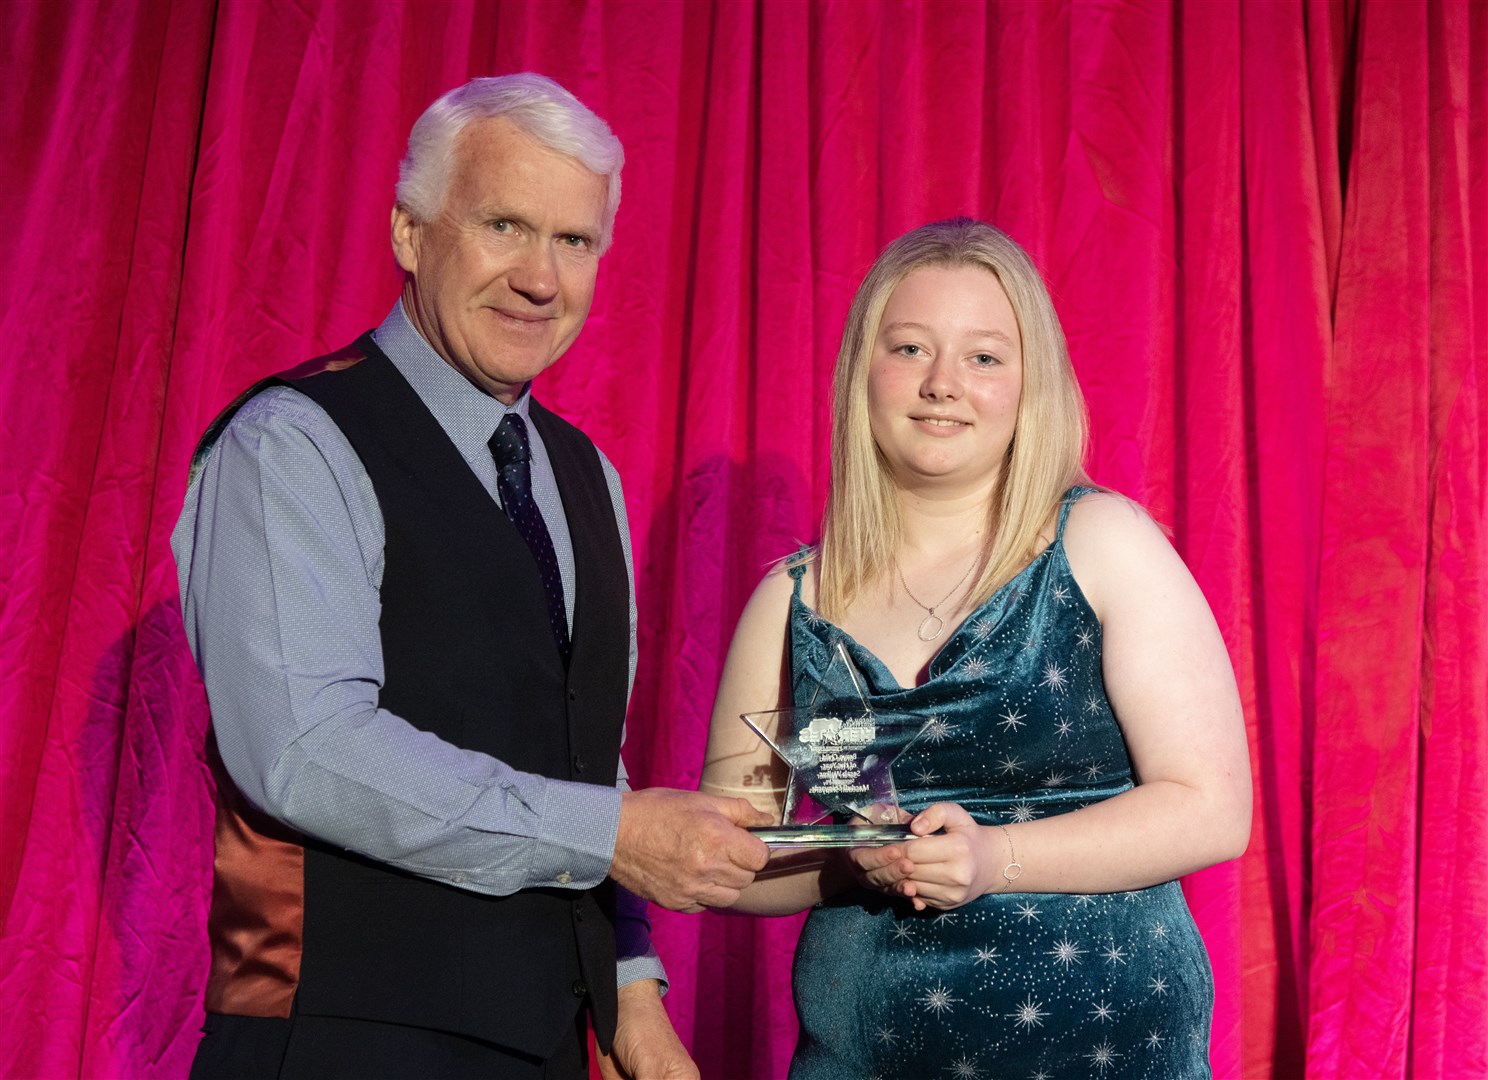 Sarah Walker was awarded Brave Child of the Year presented by John Watt, Managing Director of MacDuff Shipyards. Picture: Beth Taylor